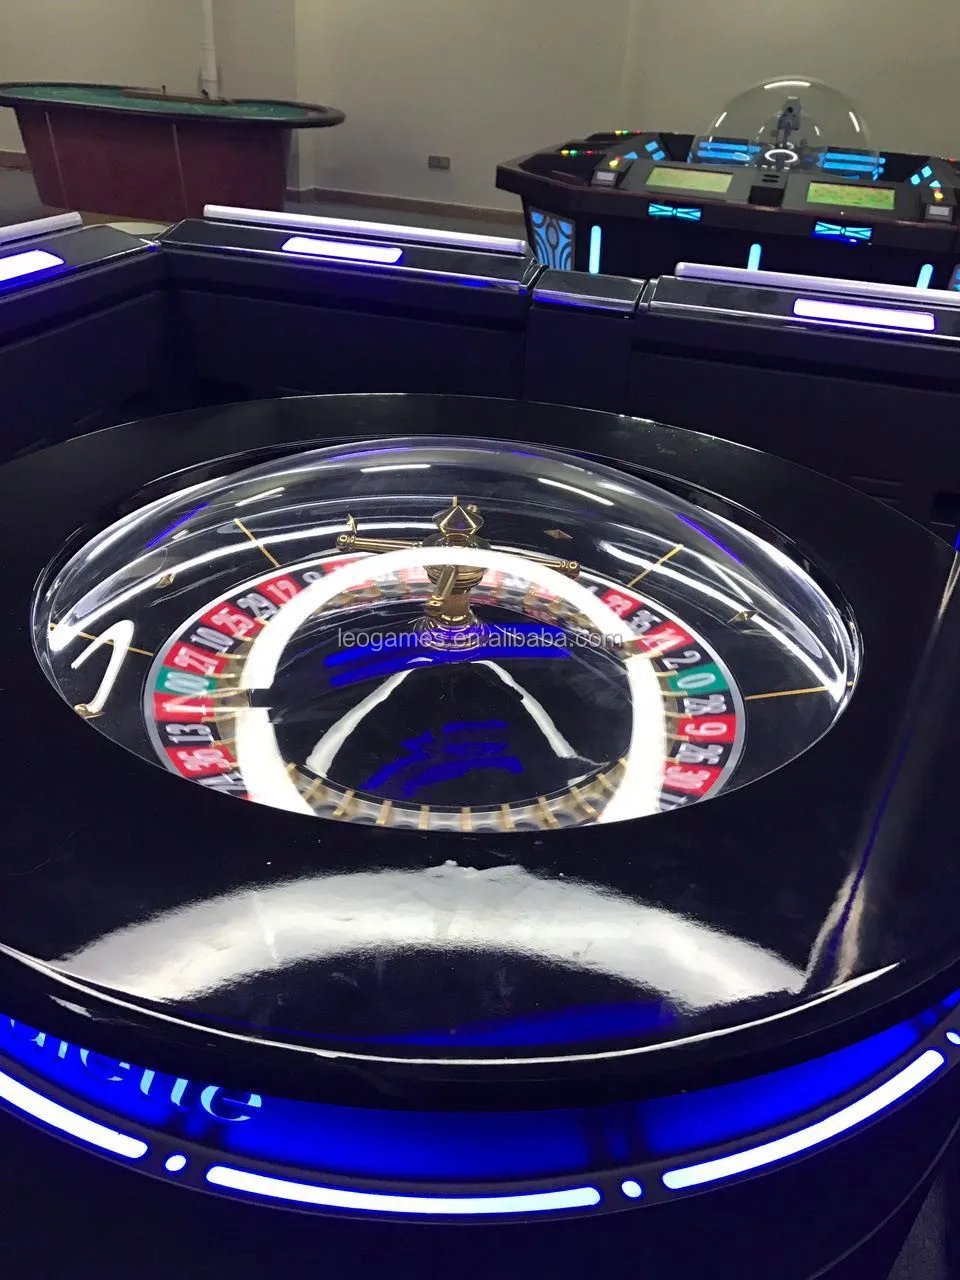 electronic roulette table odds